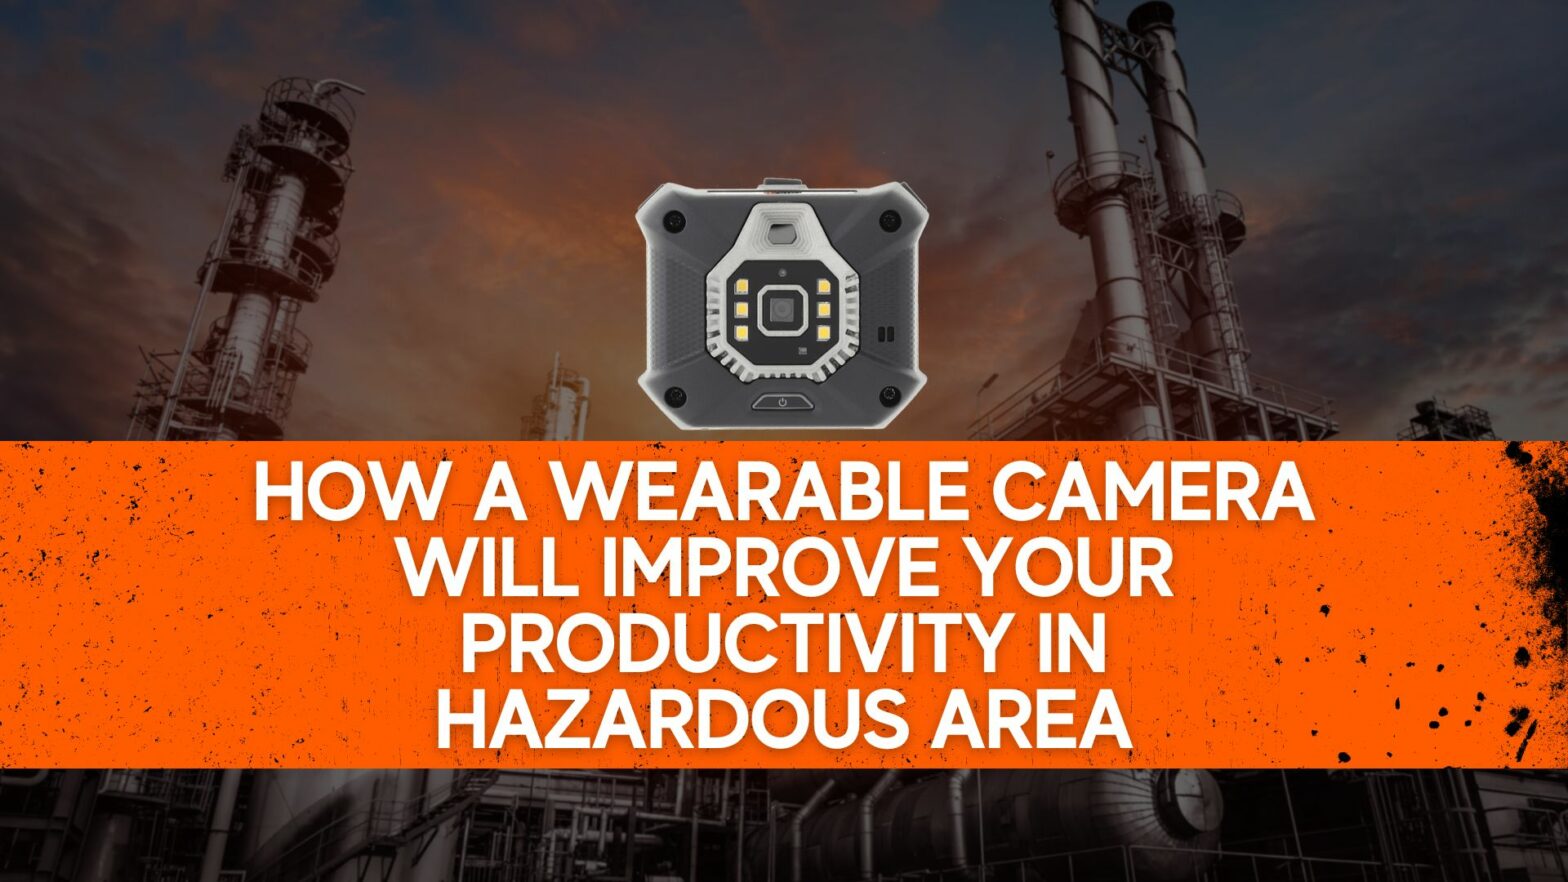 How a Wearable Camera will improve your productivity in hazardous area